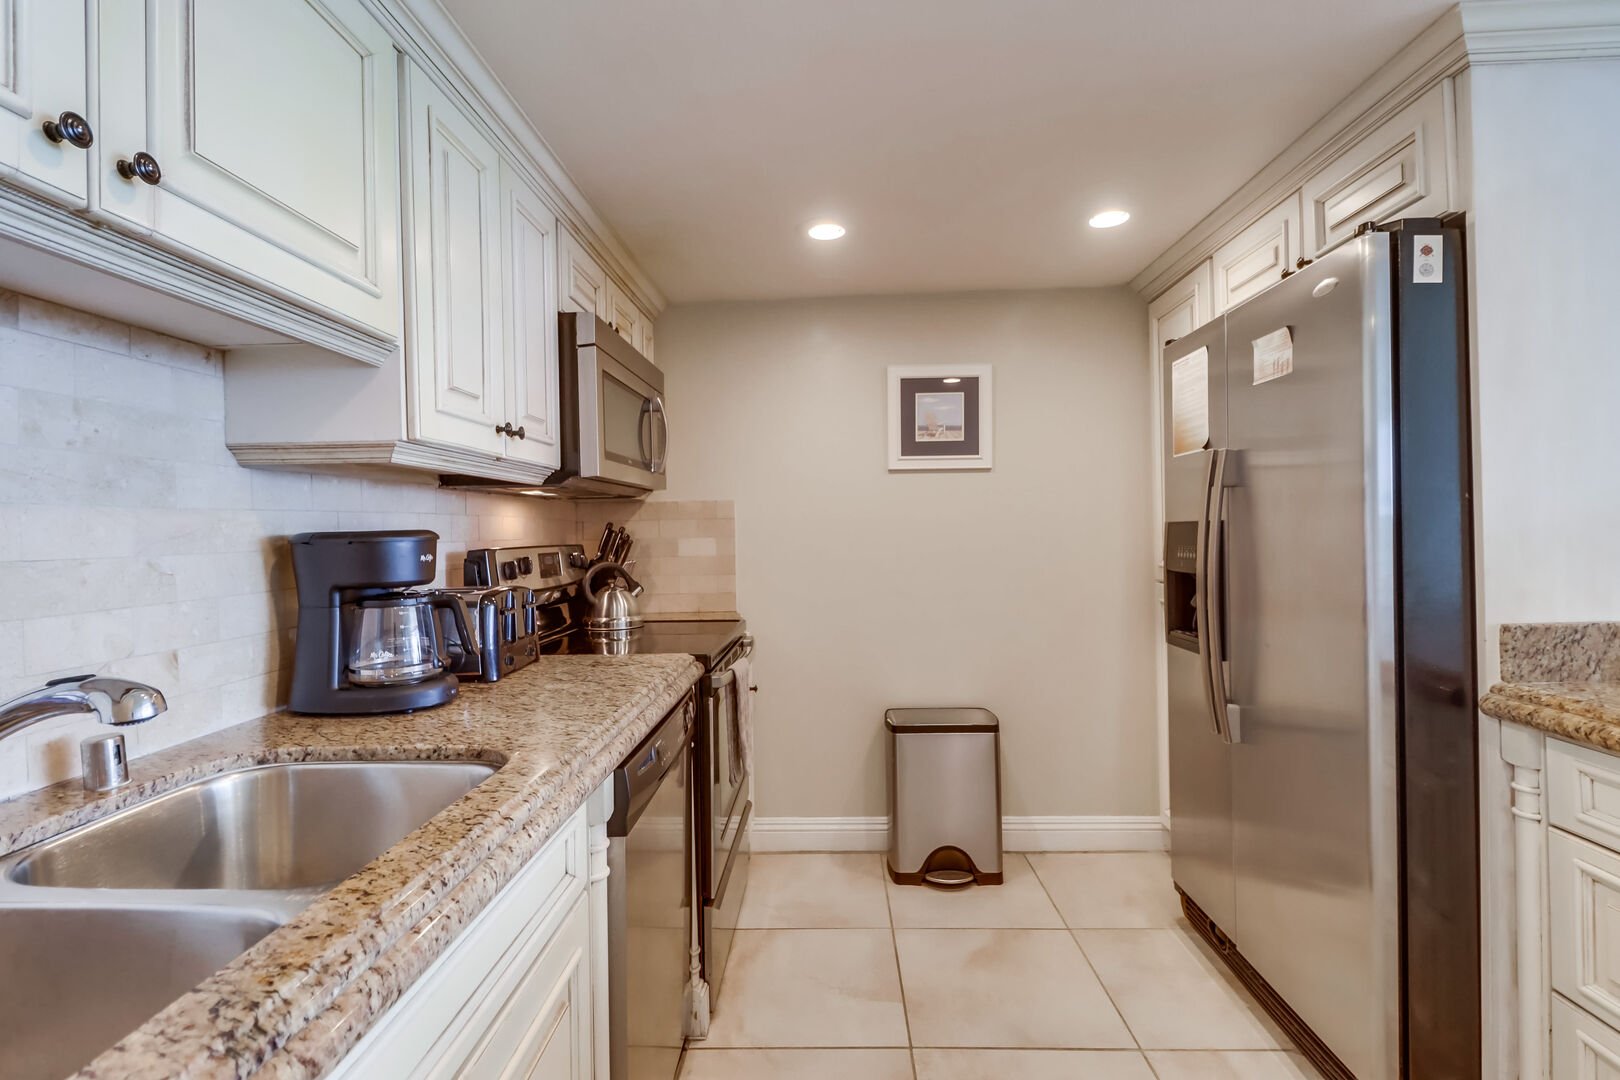 Fully equipped kitchen with stainless steel appliances including a dishwasher, standard coffee maker, oven and gas stove, toaster and large refrigerator with water filtration and freezer with ample storage.